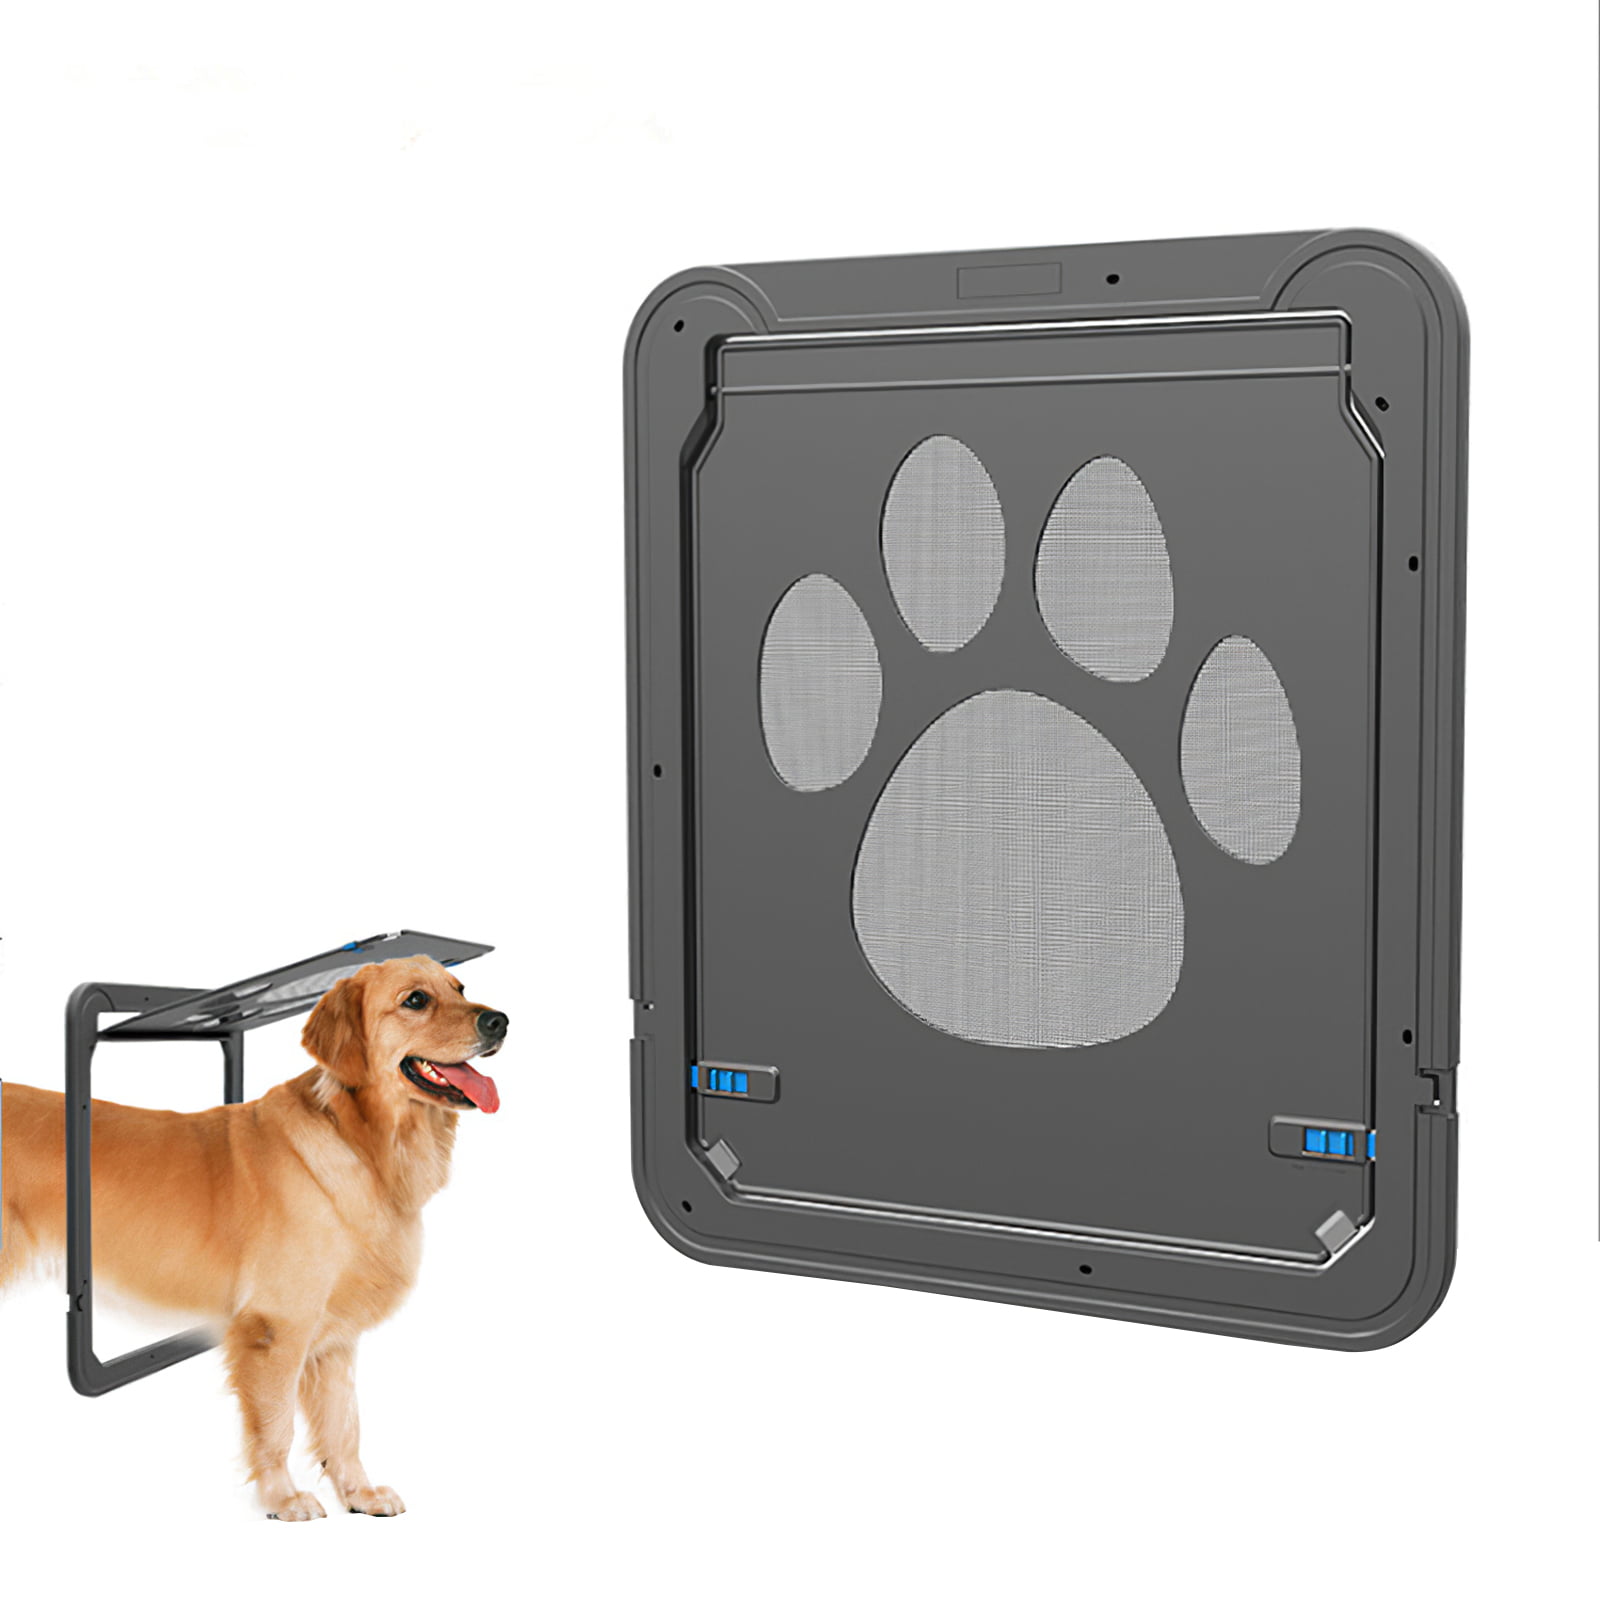 are dog doors safe for your pet